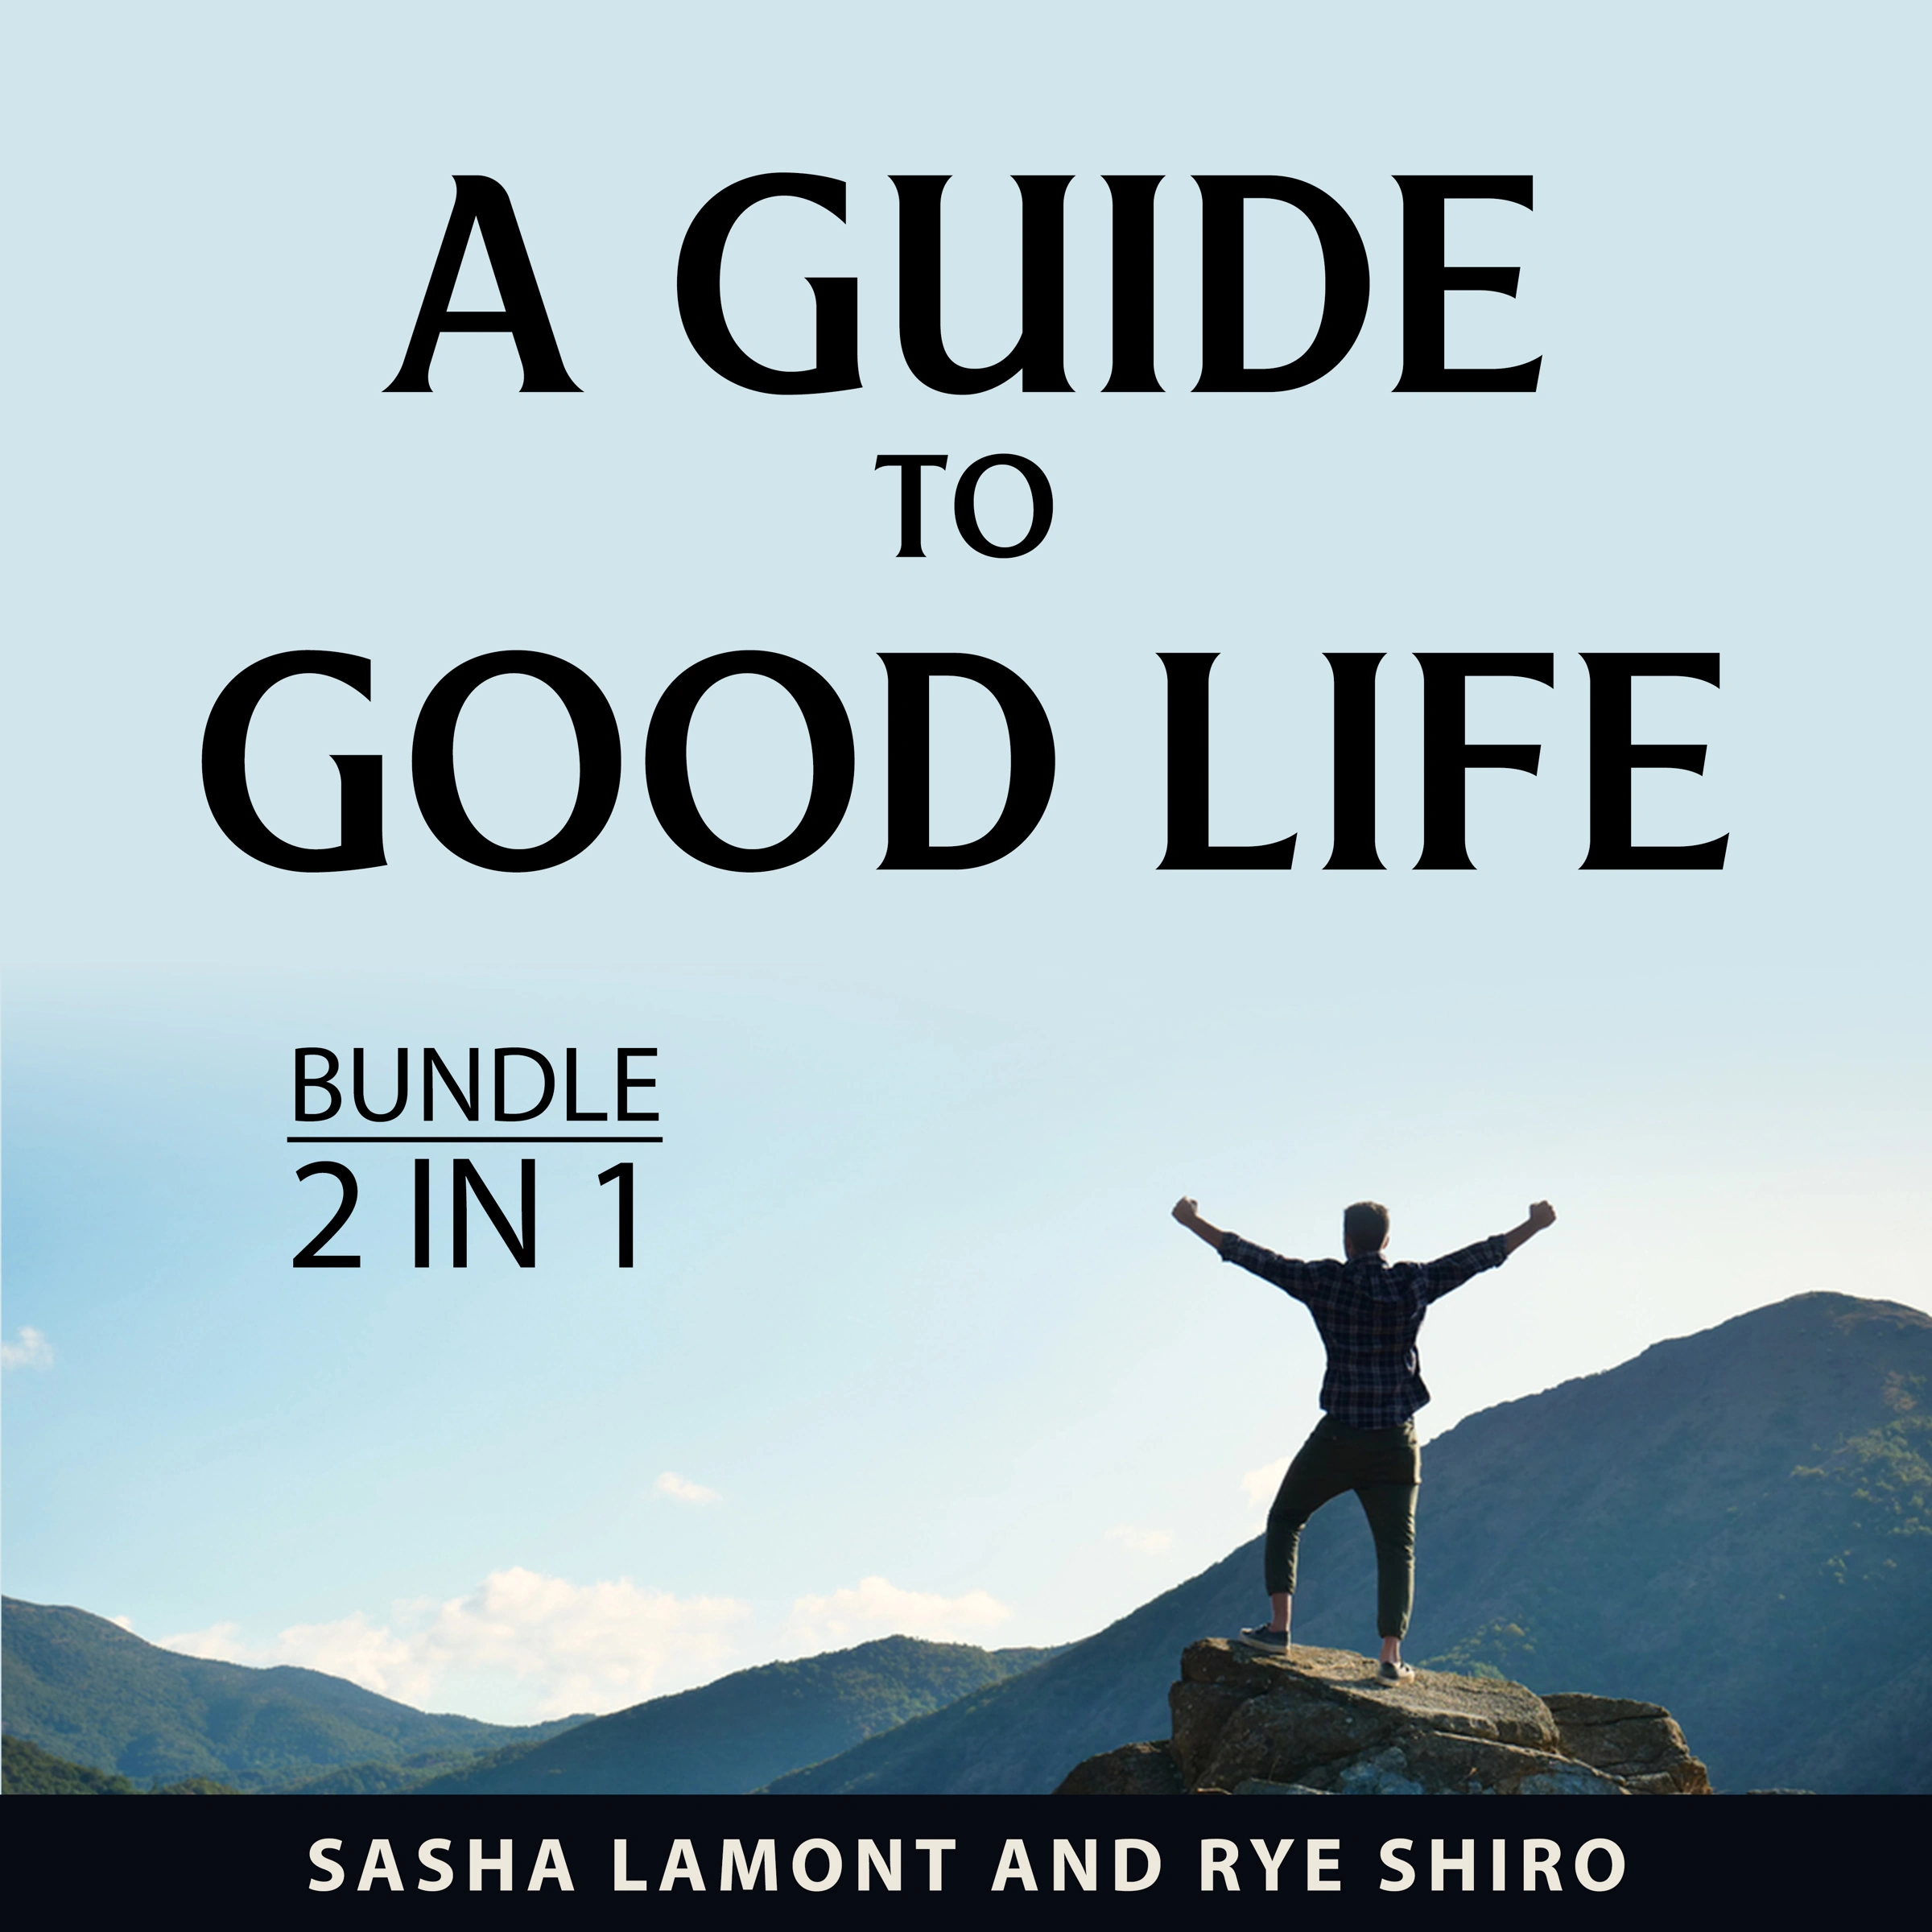 A Guide to Good Life Bundle, 2 in 1 Bundle Audiobook by Rye Shiro